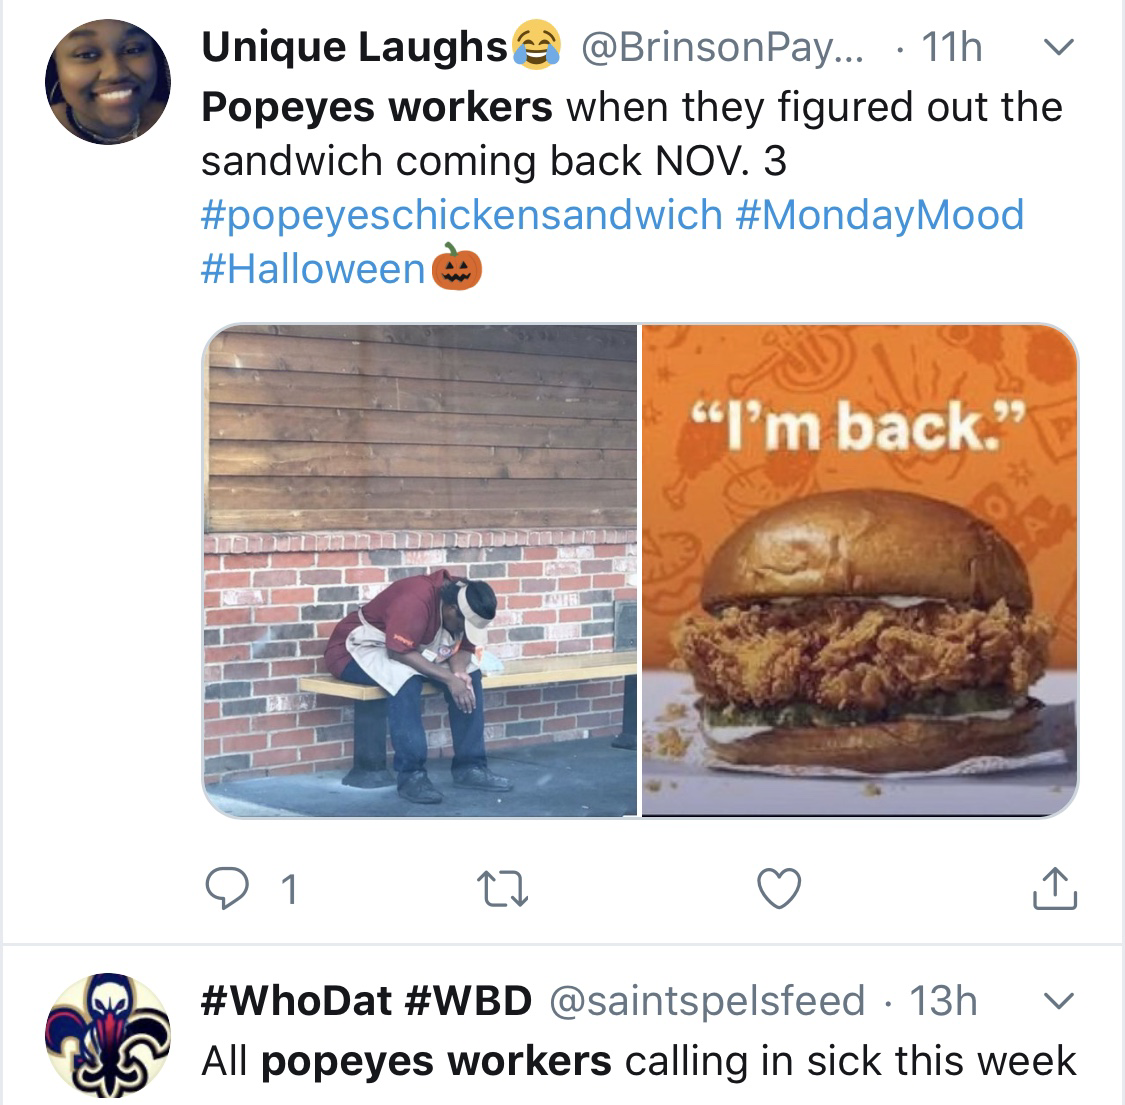 new orleans pelicans - Unique Laughs Pay... 11h v Popeyes workers when they figured out the sandwich coming back Nov. 3 Mood "I'm back." 91 L2 13h v All popeyes workers calling in sick this week